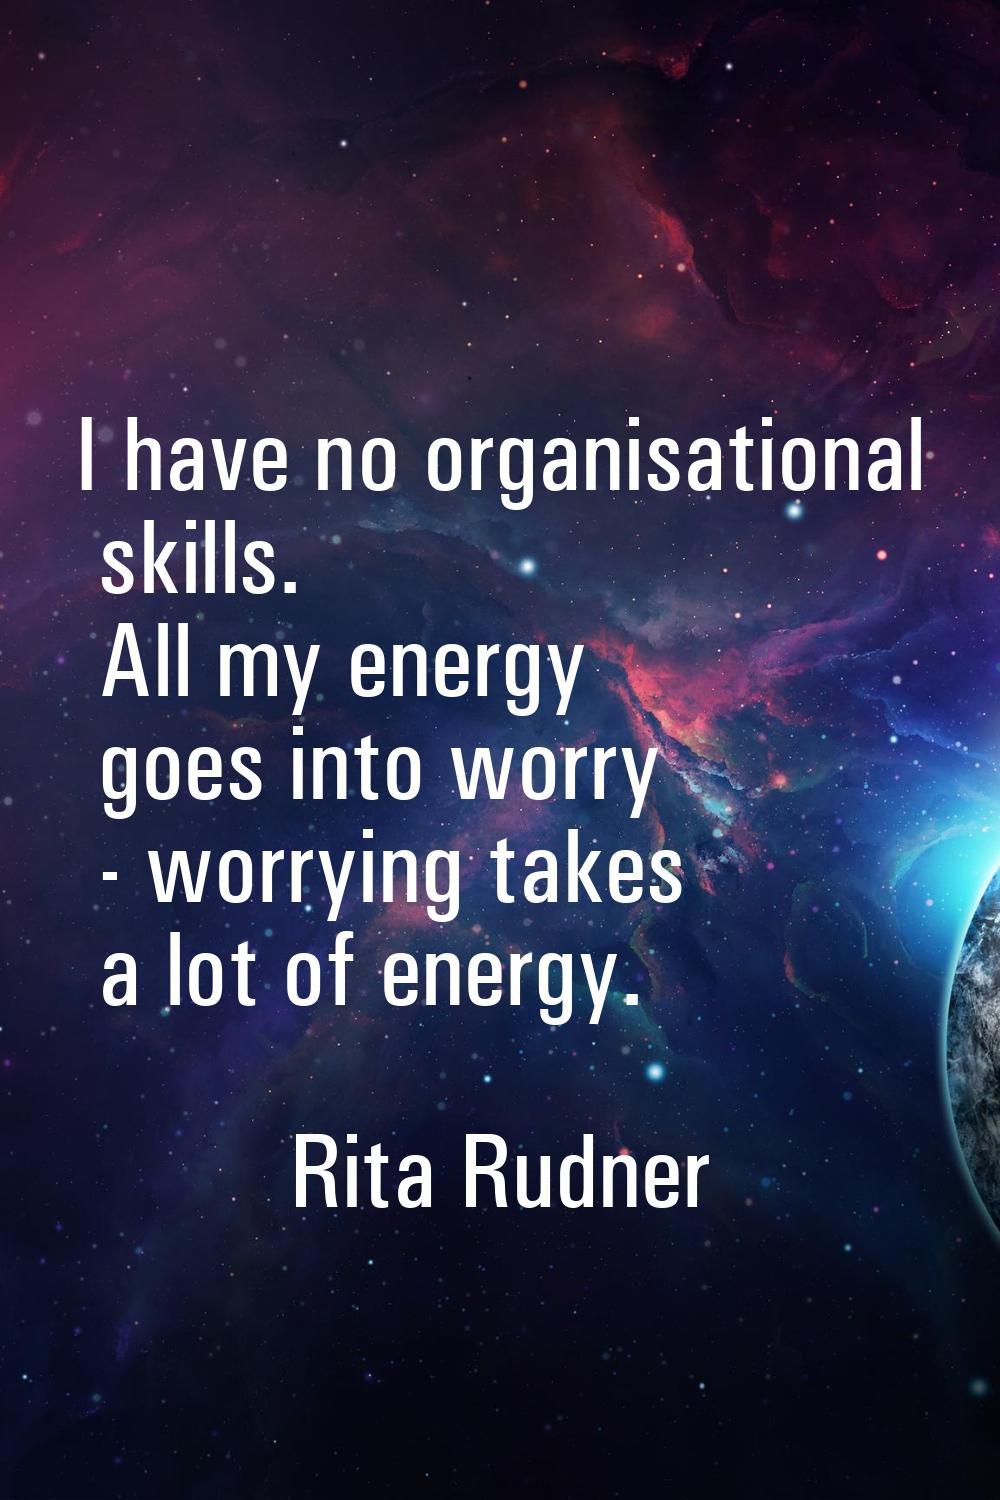 I have no organisational skills. All my energy goes into worry - worrying takes a lot of energy.